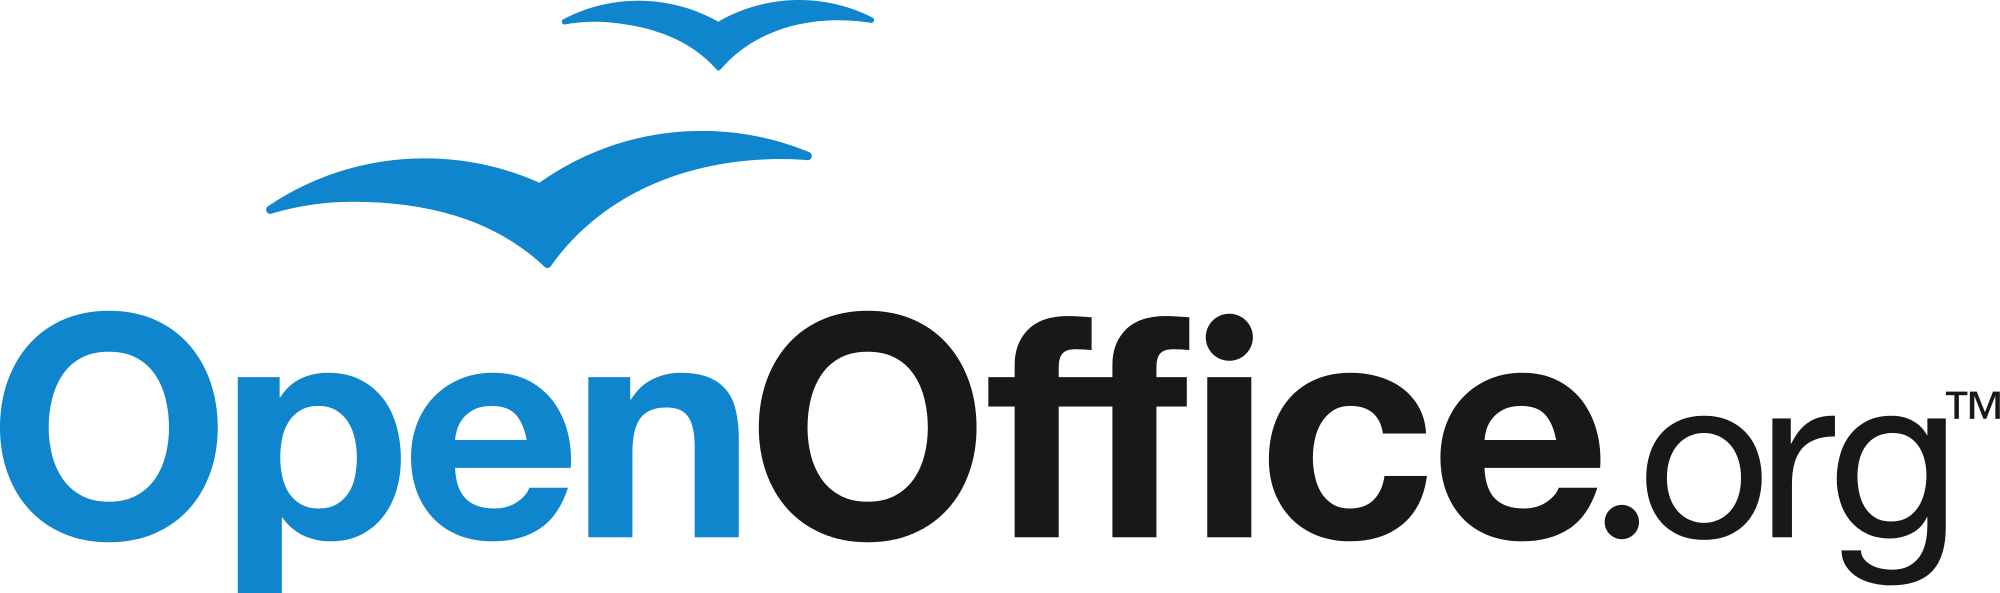 Open Office - Org Image - Open Office Logo Png (2000x593)